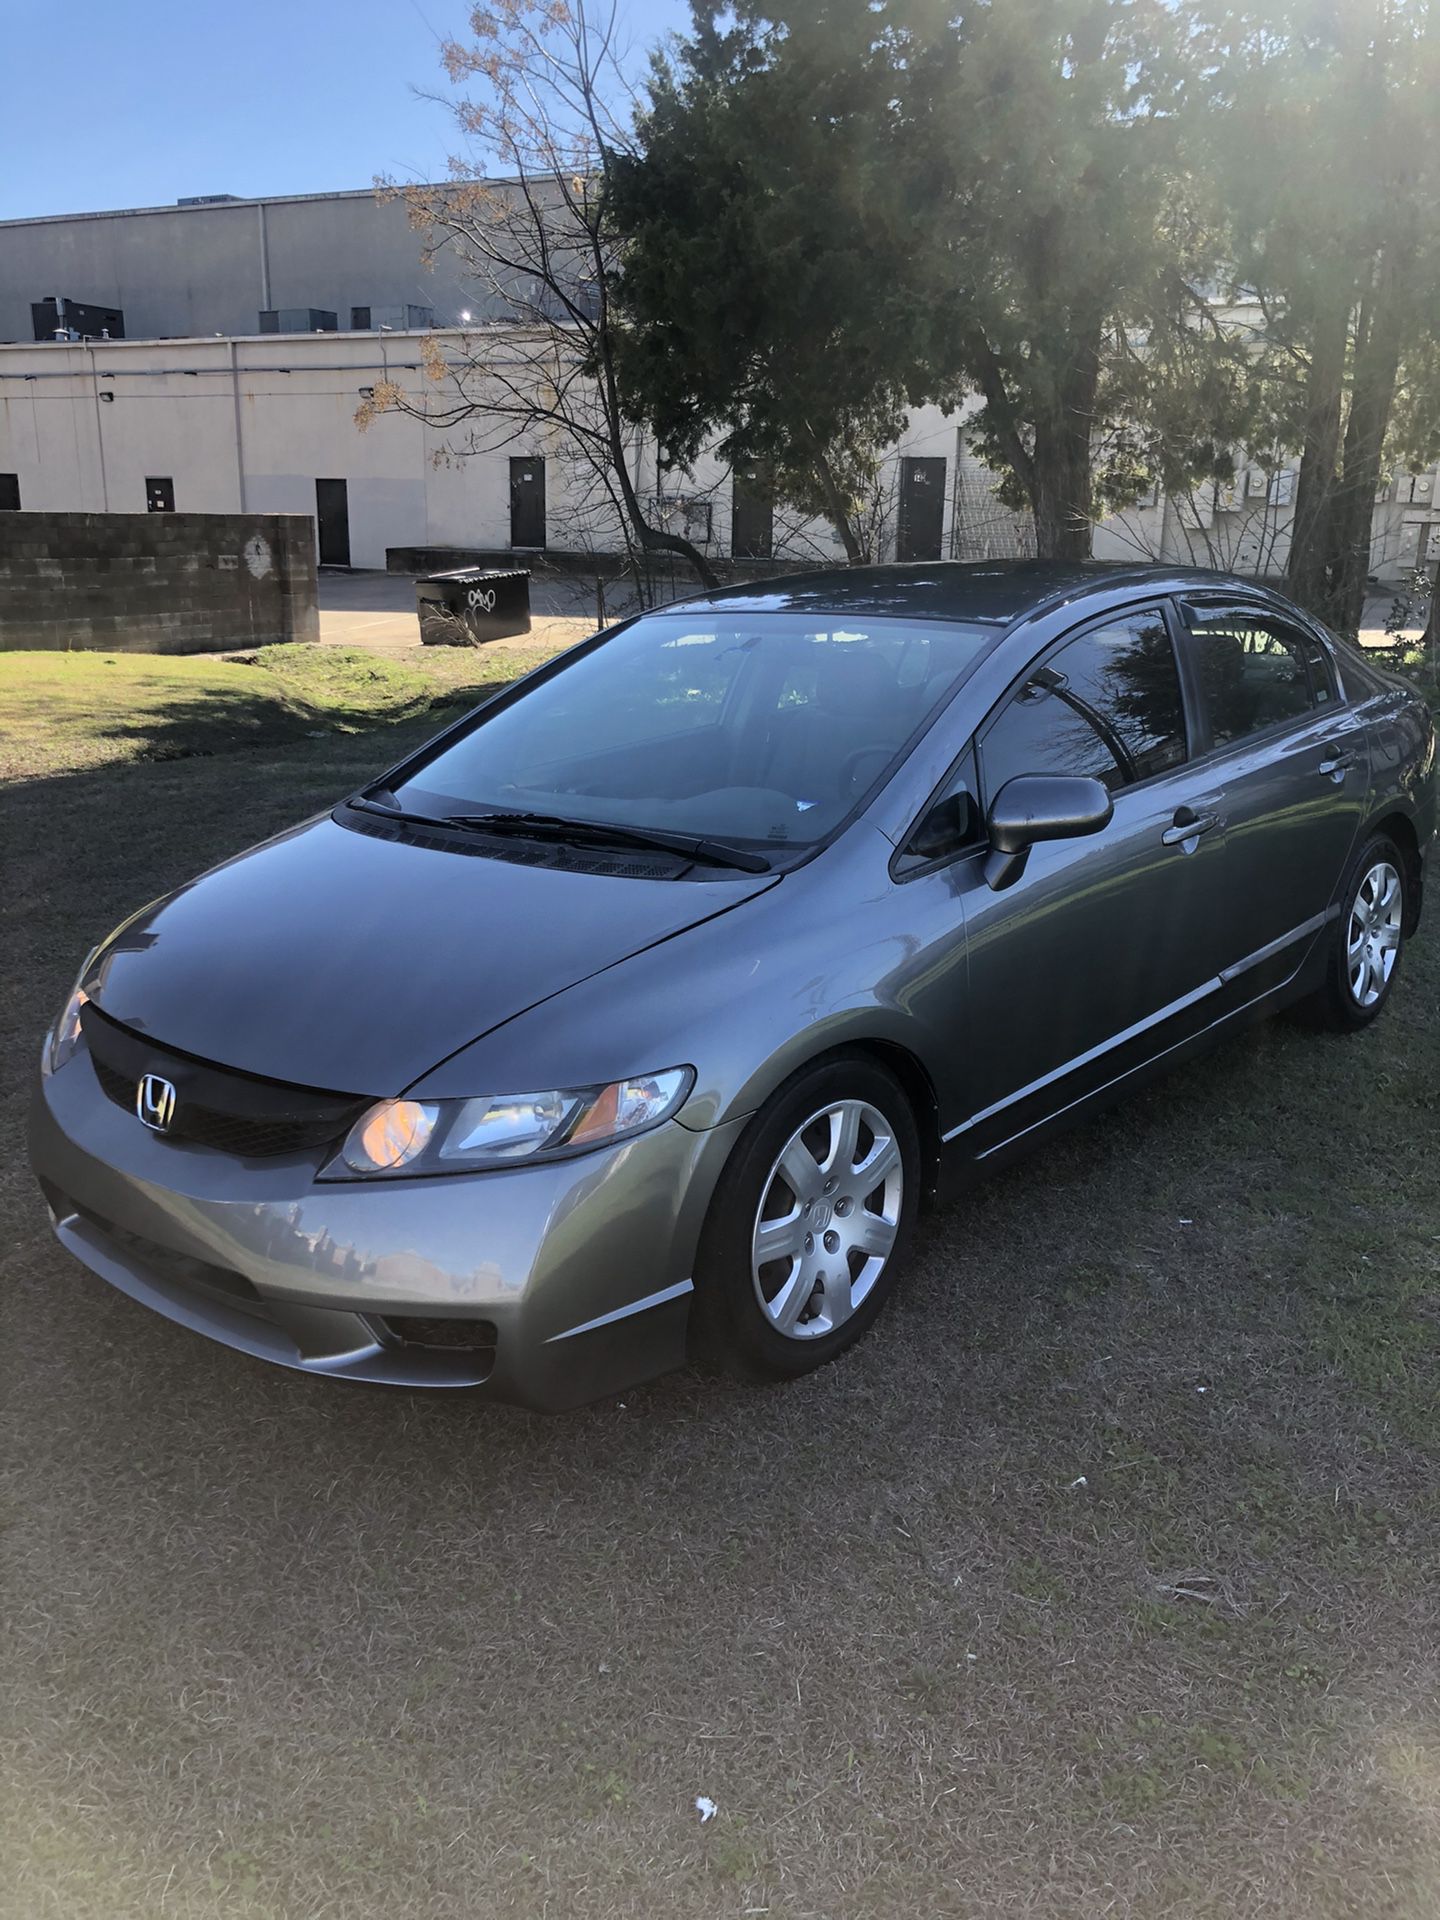 ///2009 HONDA CIVIC EX ONLY 48,000 MILES BEAUTIFUL CAR CHEAP TODAY \\\